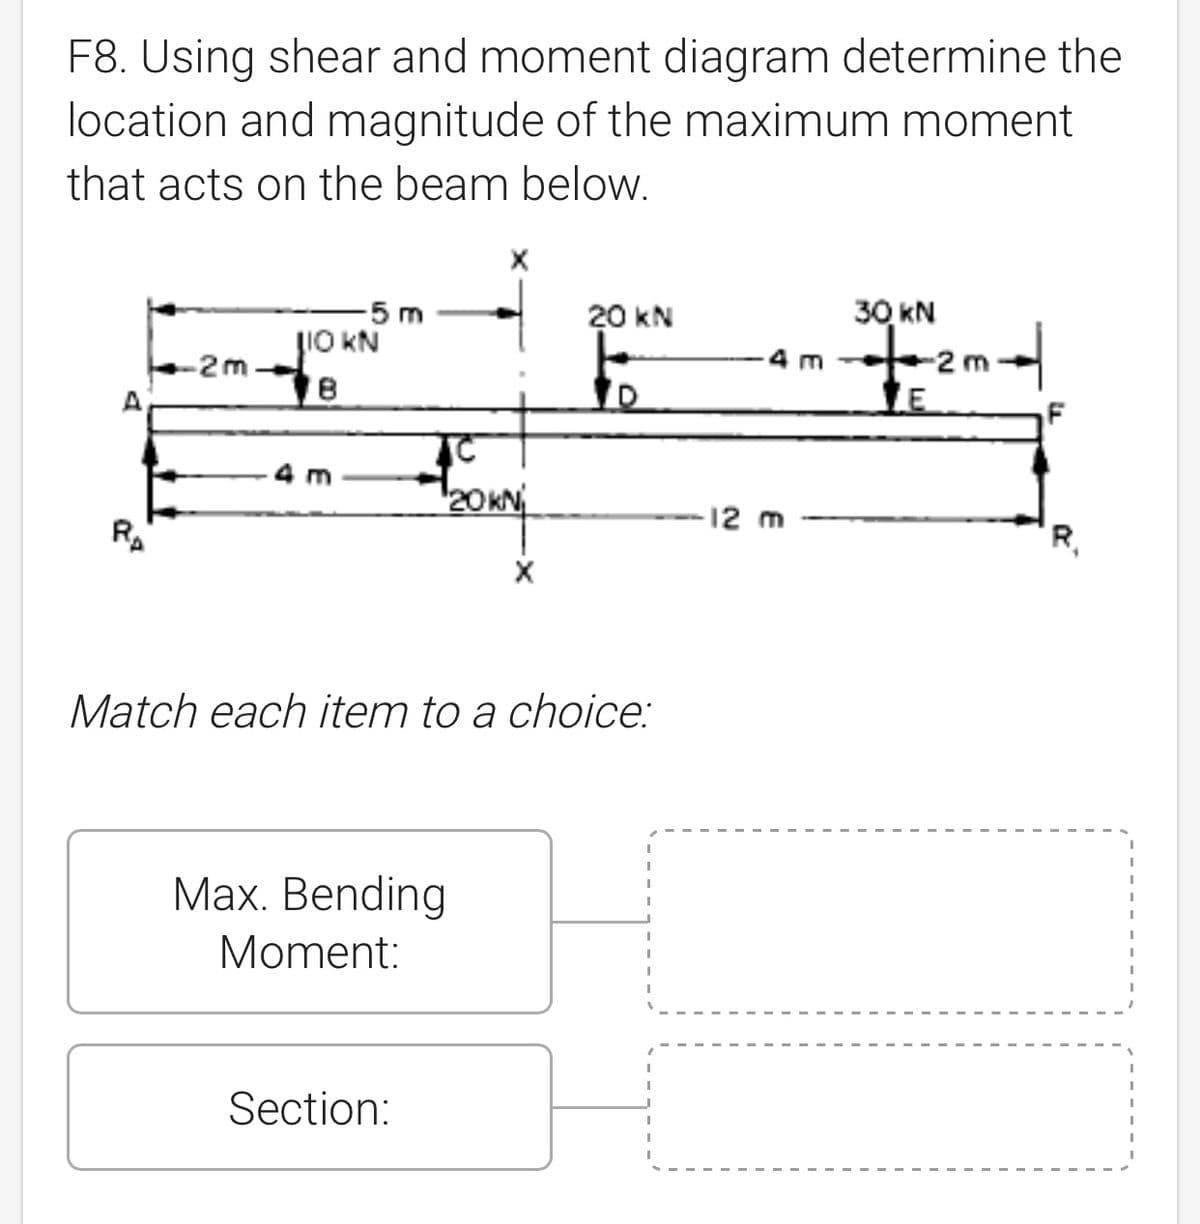 F8. Using shear and moment diagram determine the
location and magnitude of the maximum moment
that acts on the beam below.
-5 m
20 kN
30 kN
LIO KN
-2m-
++ 2m +
18
LE
TC
m
120 KNj
X
Match each item to a choice:
Max. Bending
Moment:
Section:
-12 m